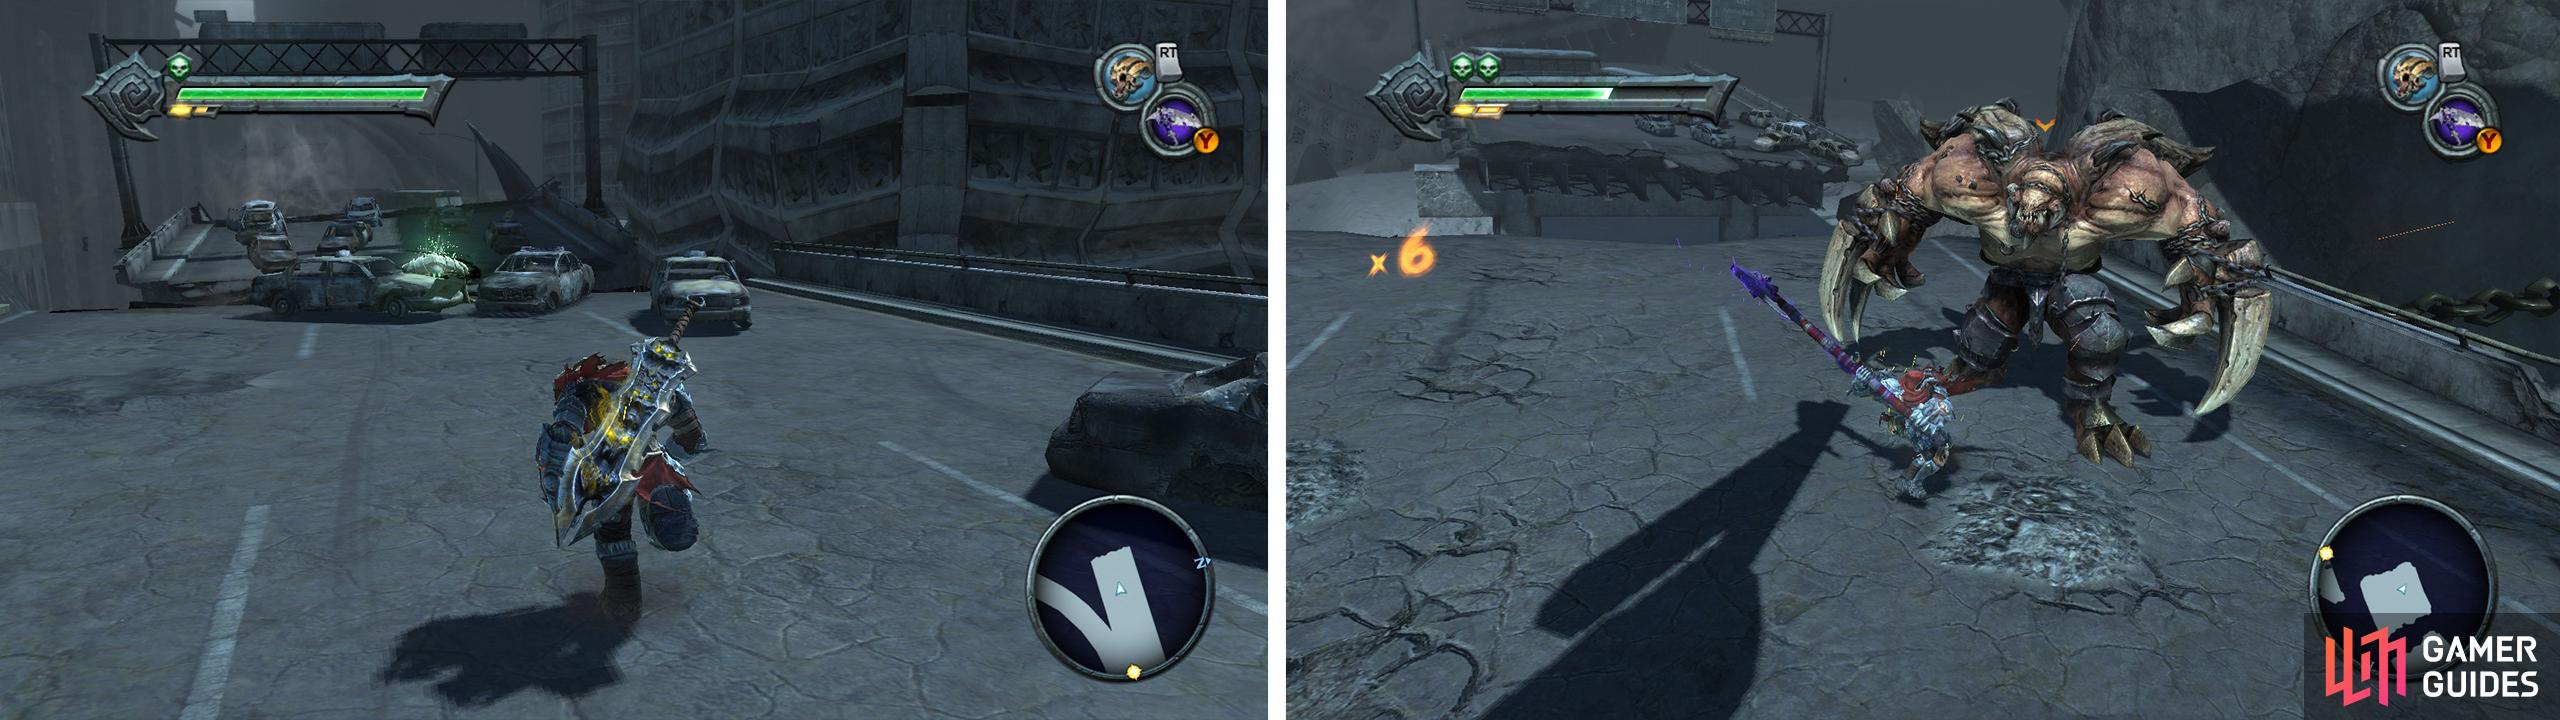 When you reach the overpass, grab the Life Stone Shard from the dead end to the left (right). Continue across the segments of highway until you meet the Scythe Demon (right).